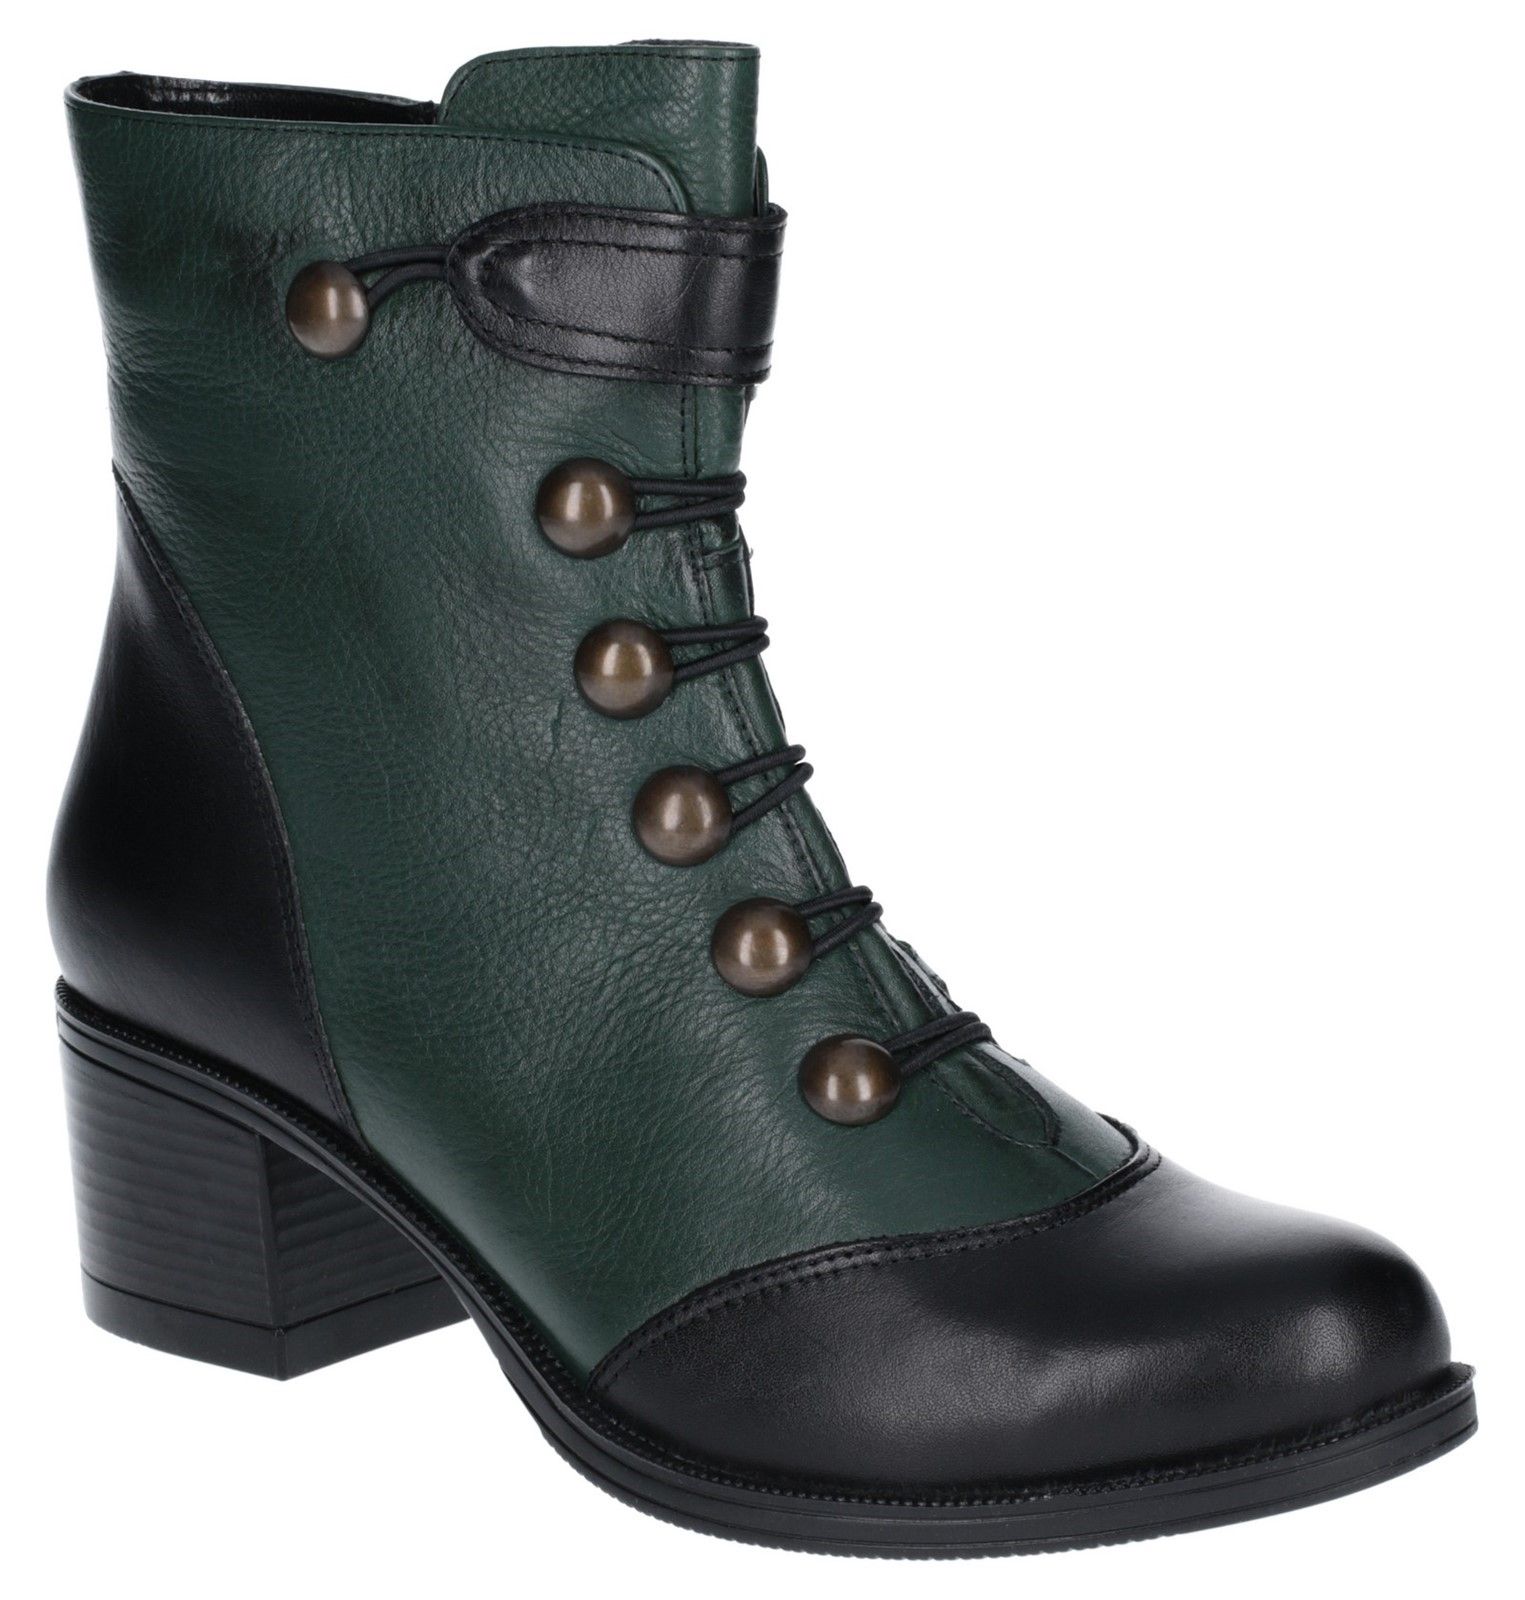 Stylish ladies long boot from Riva with luxury Leather Upper Leather.